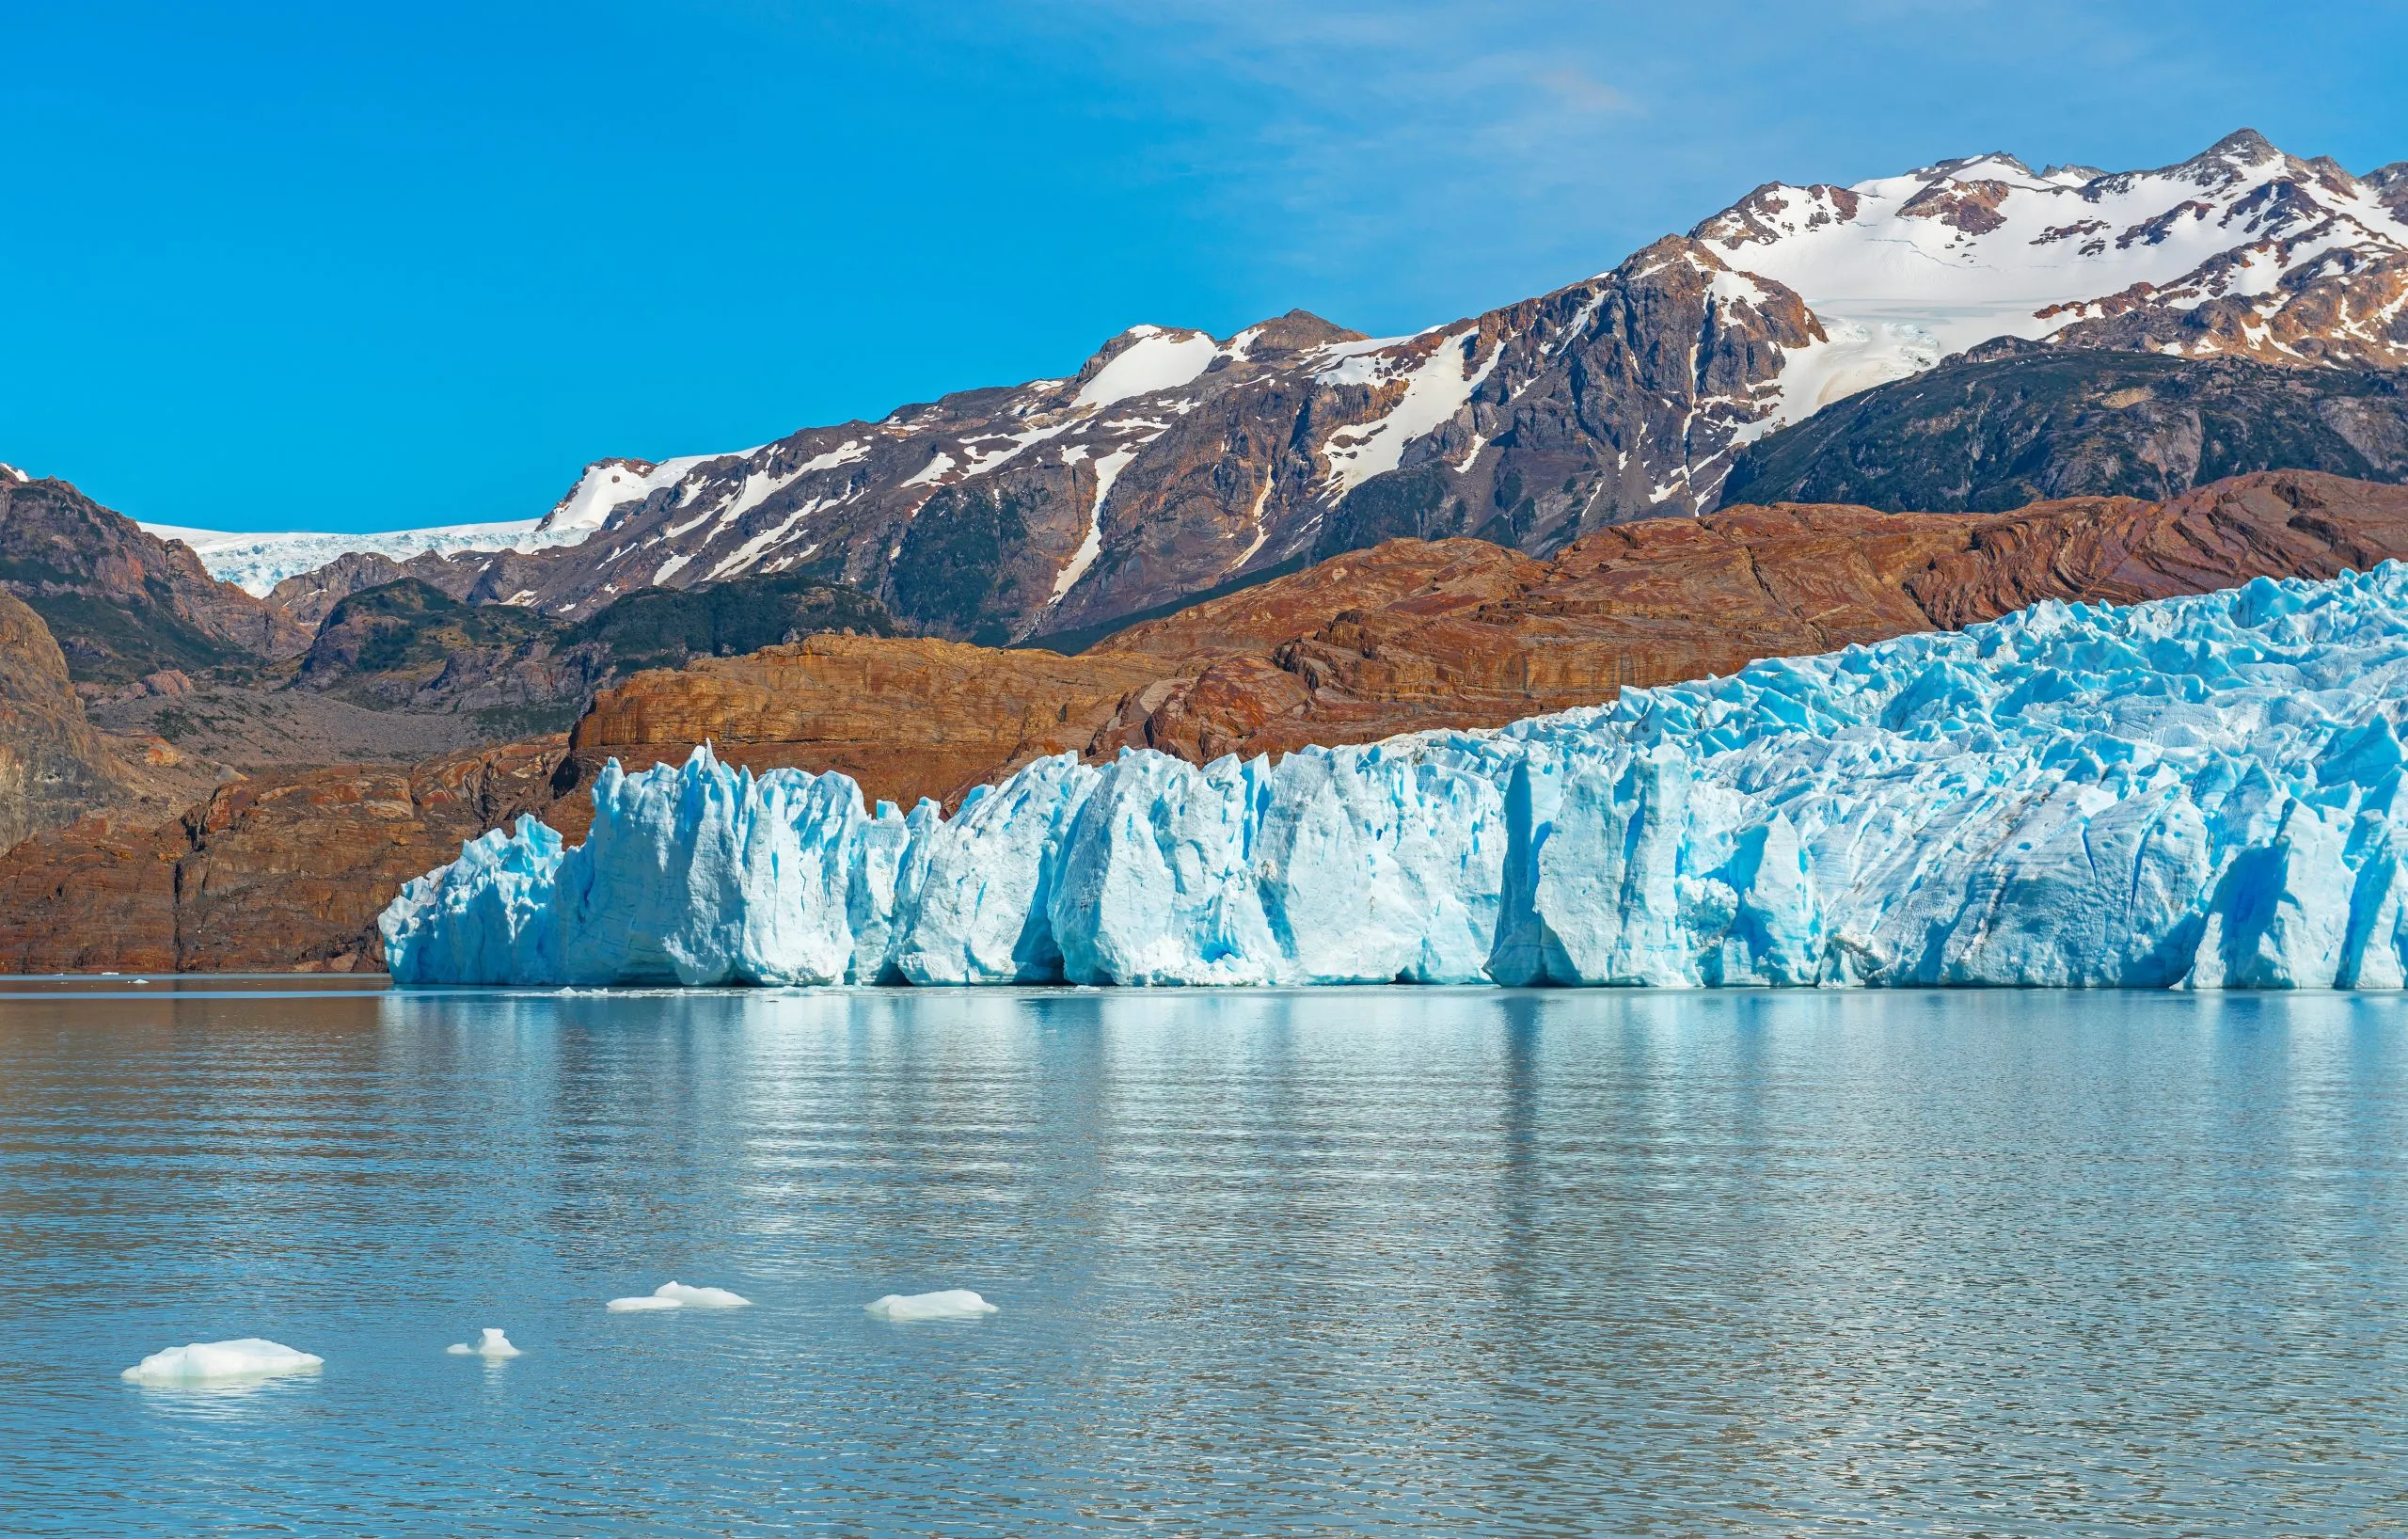 The majestic Grey Glacier in summer with small icebergs in Lago Grey with the Andes mountain range in the background, Torres del Paine national park, Puerto Natales, Patagonia, Chile.